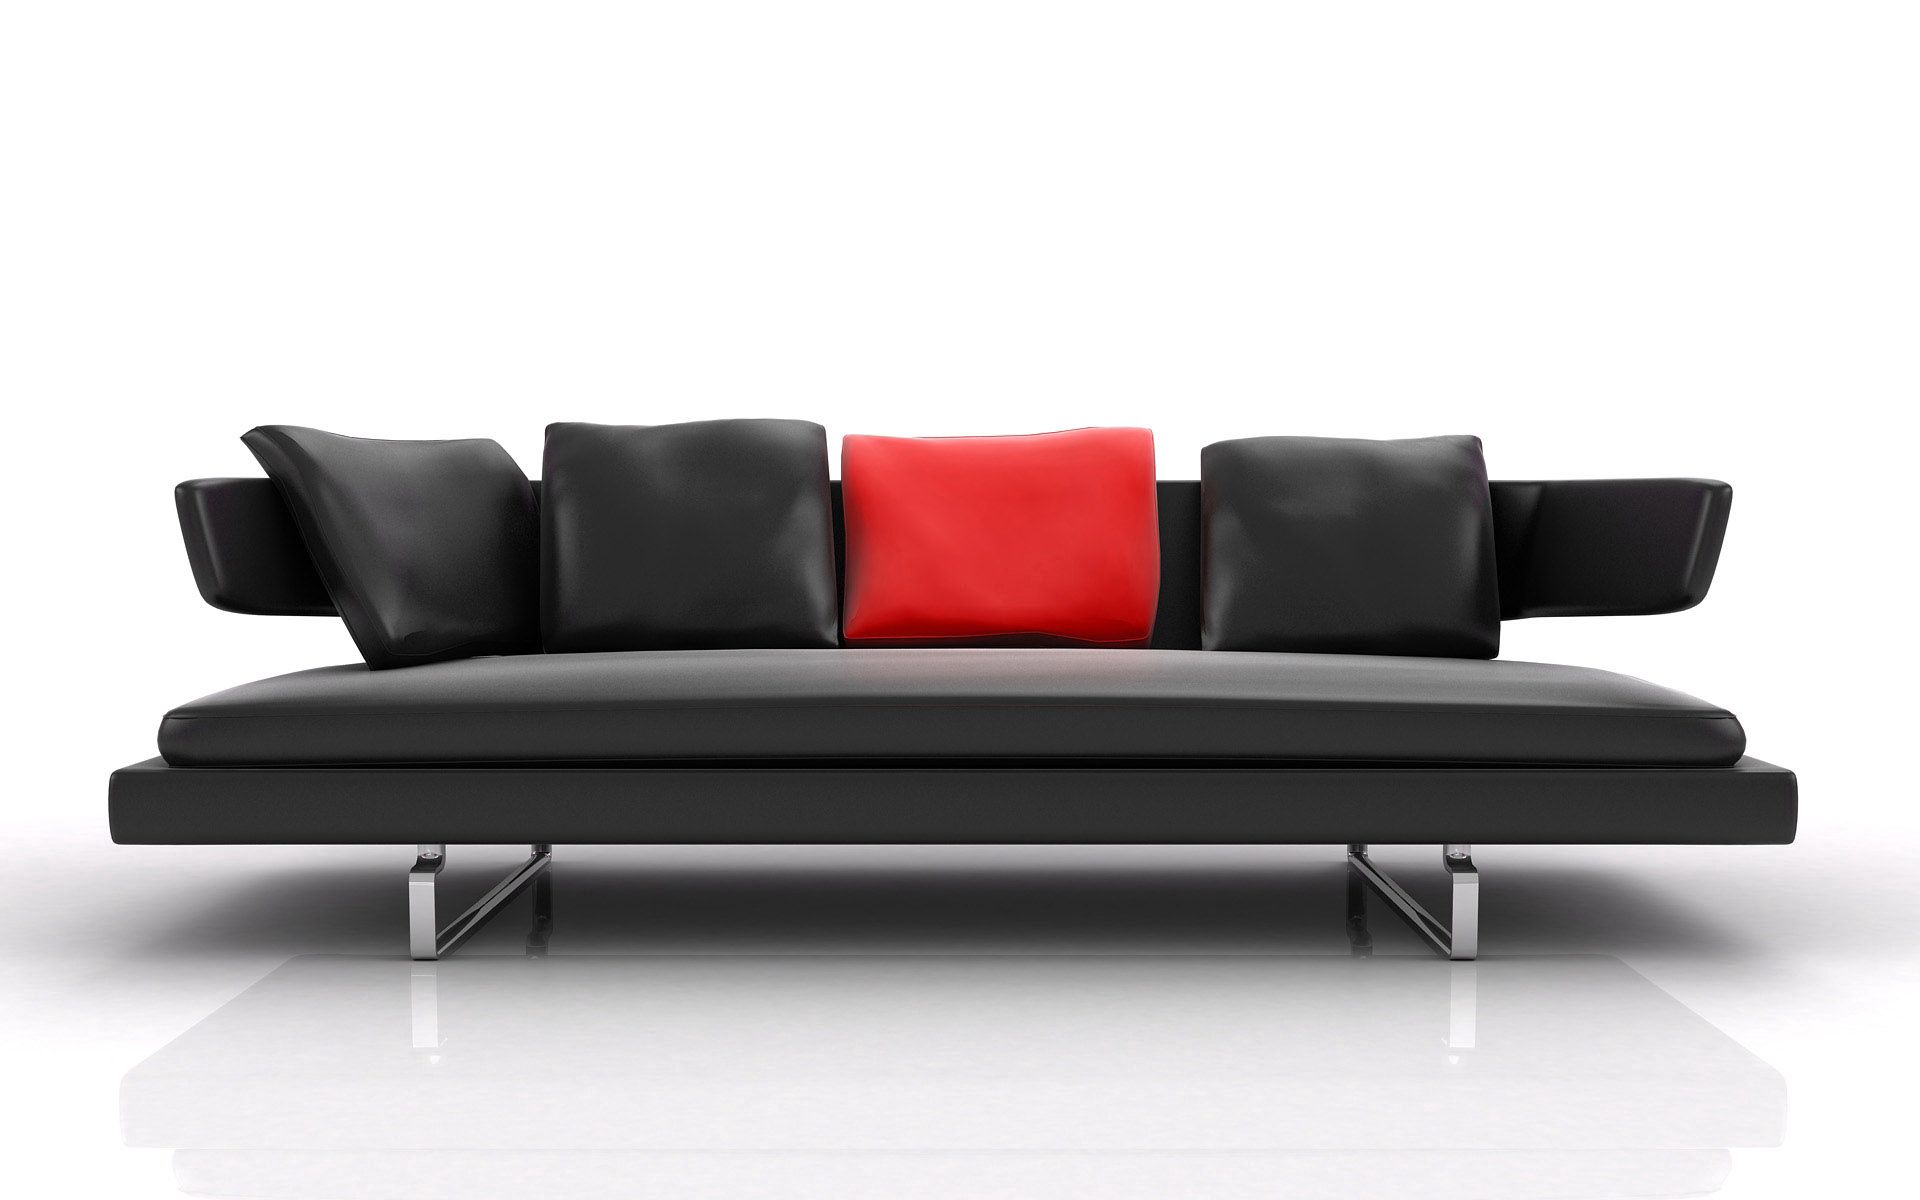 furniture, miscellanea, miscellaneous, style, sofa, modern, up to date, cushions, pillows 4K